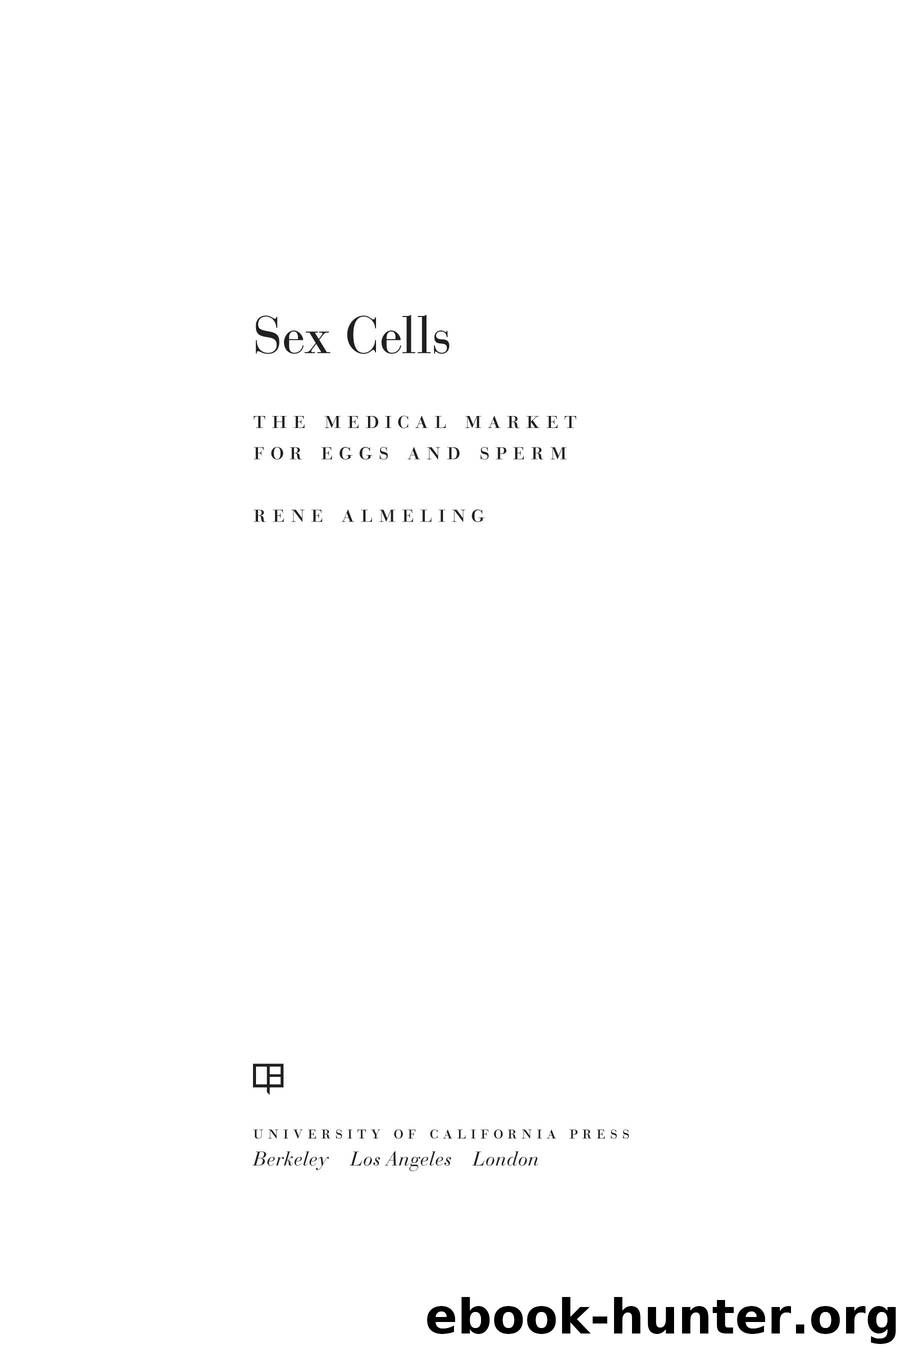 Sex Cells by Rene Almeling